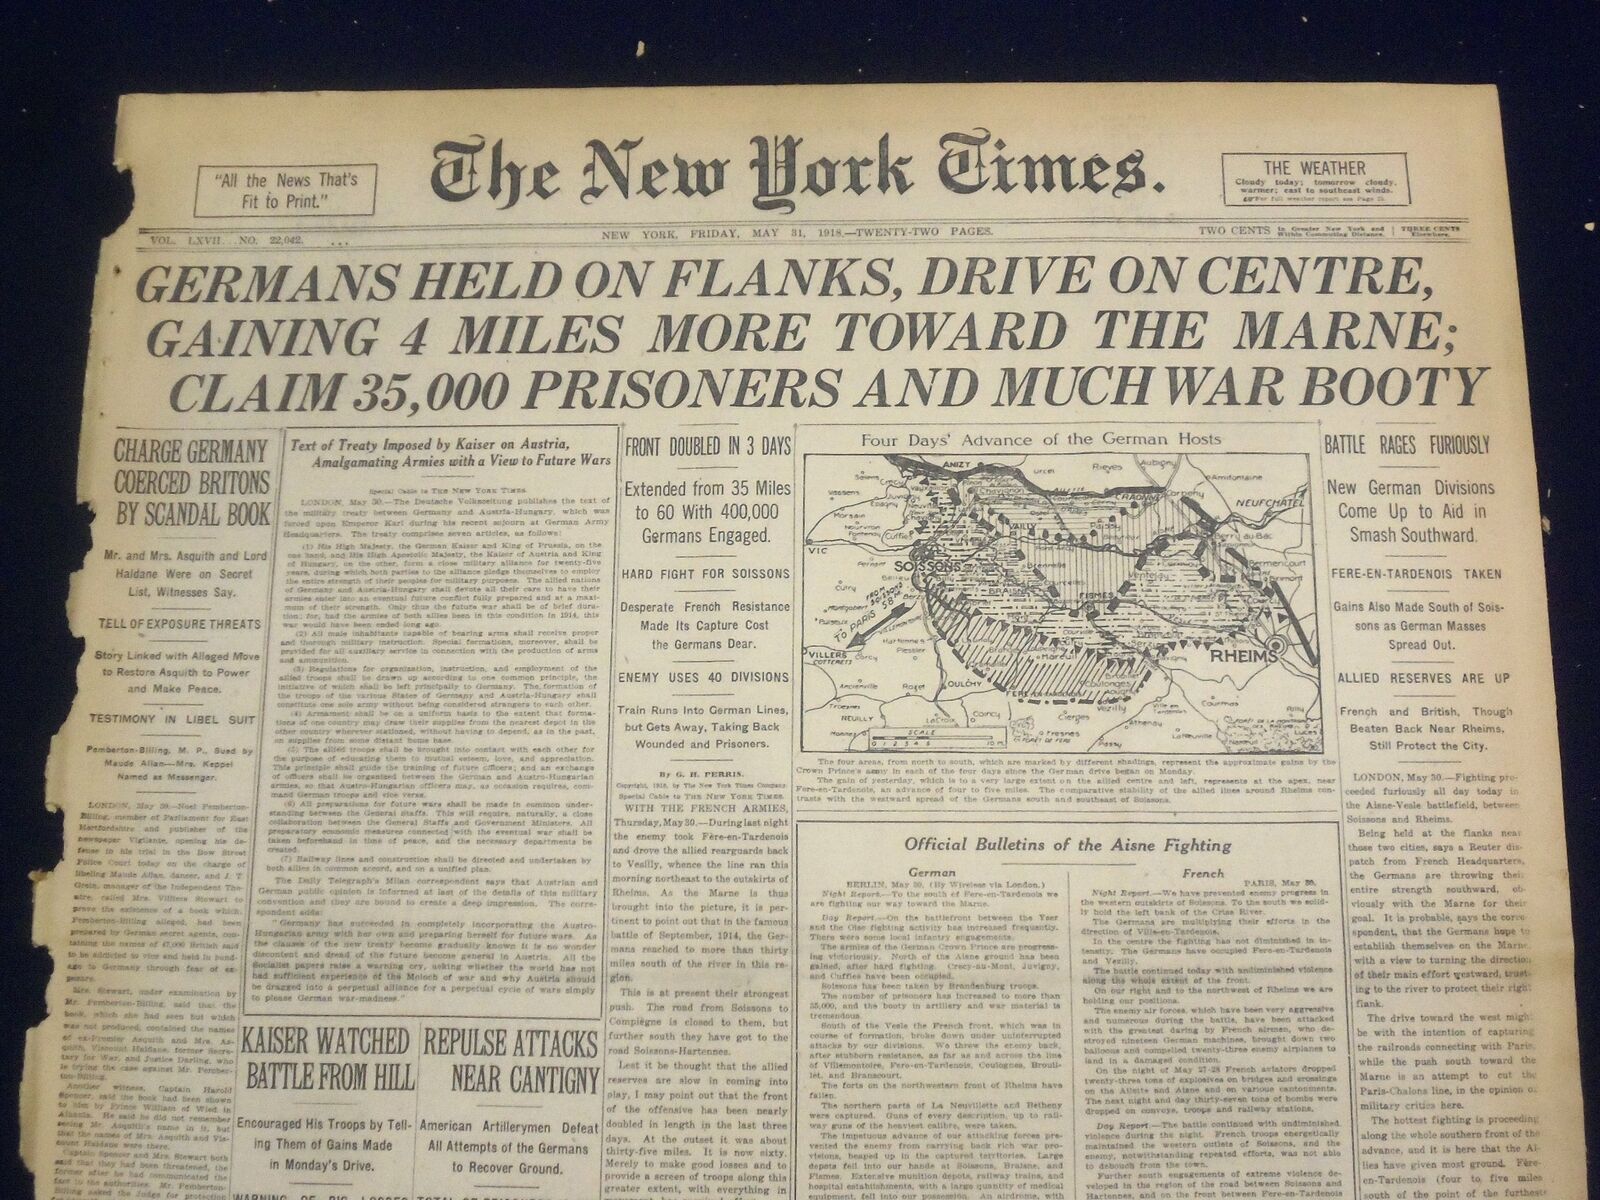 1918 MAY 31 NEW YORK TIMES - GERMANS GAIN 4 MILES TOWARD THE MARNE - NT 8183